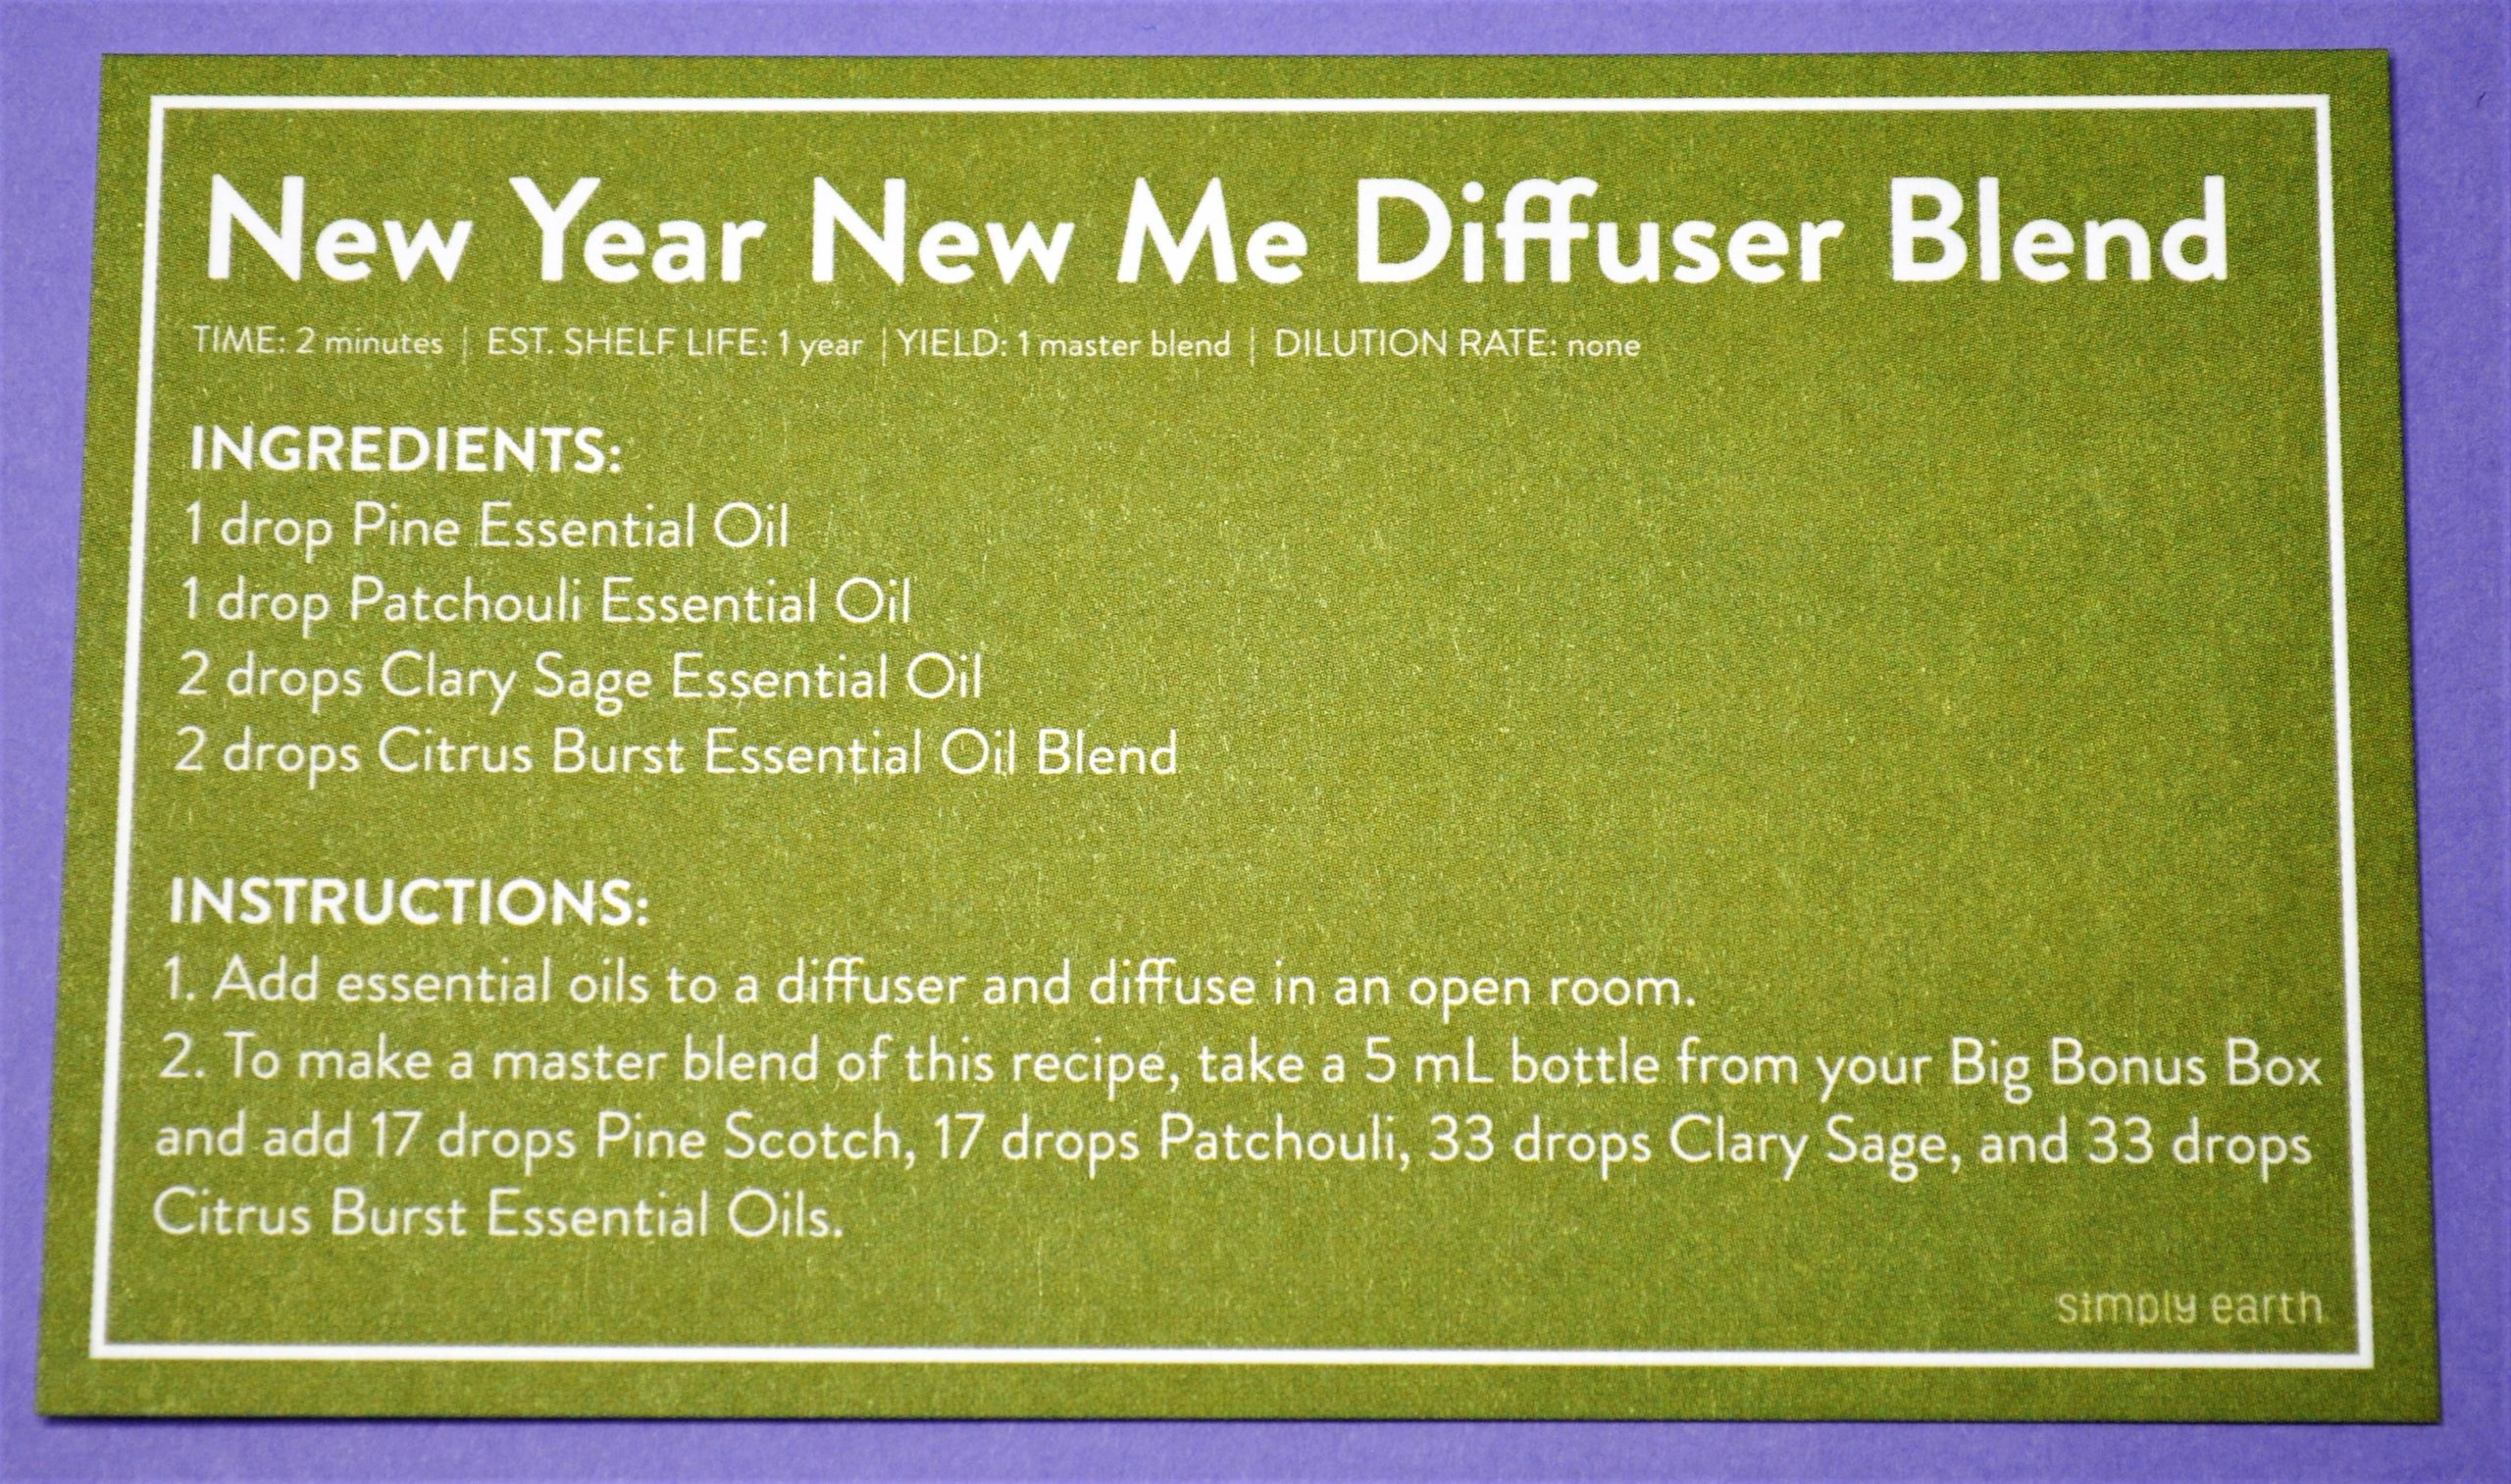 New Year New Me Diffuser Blend Recipe